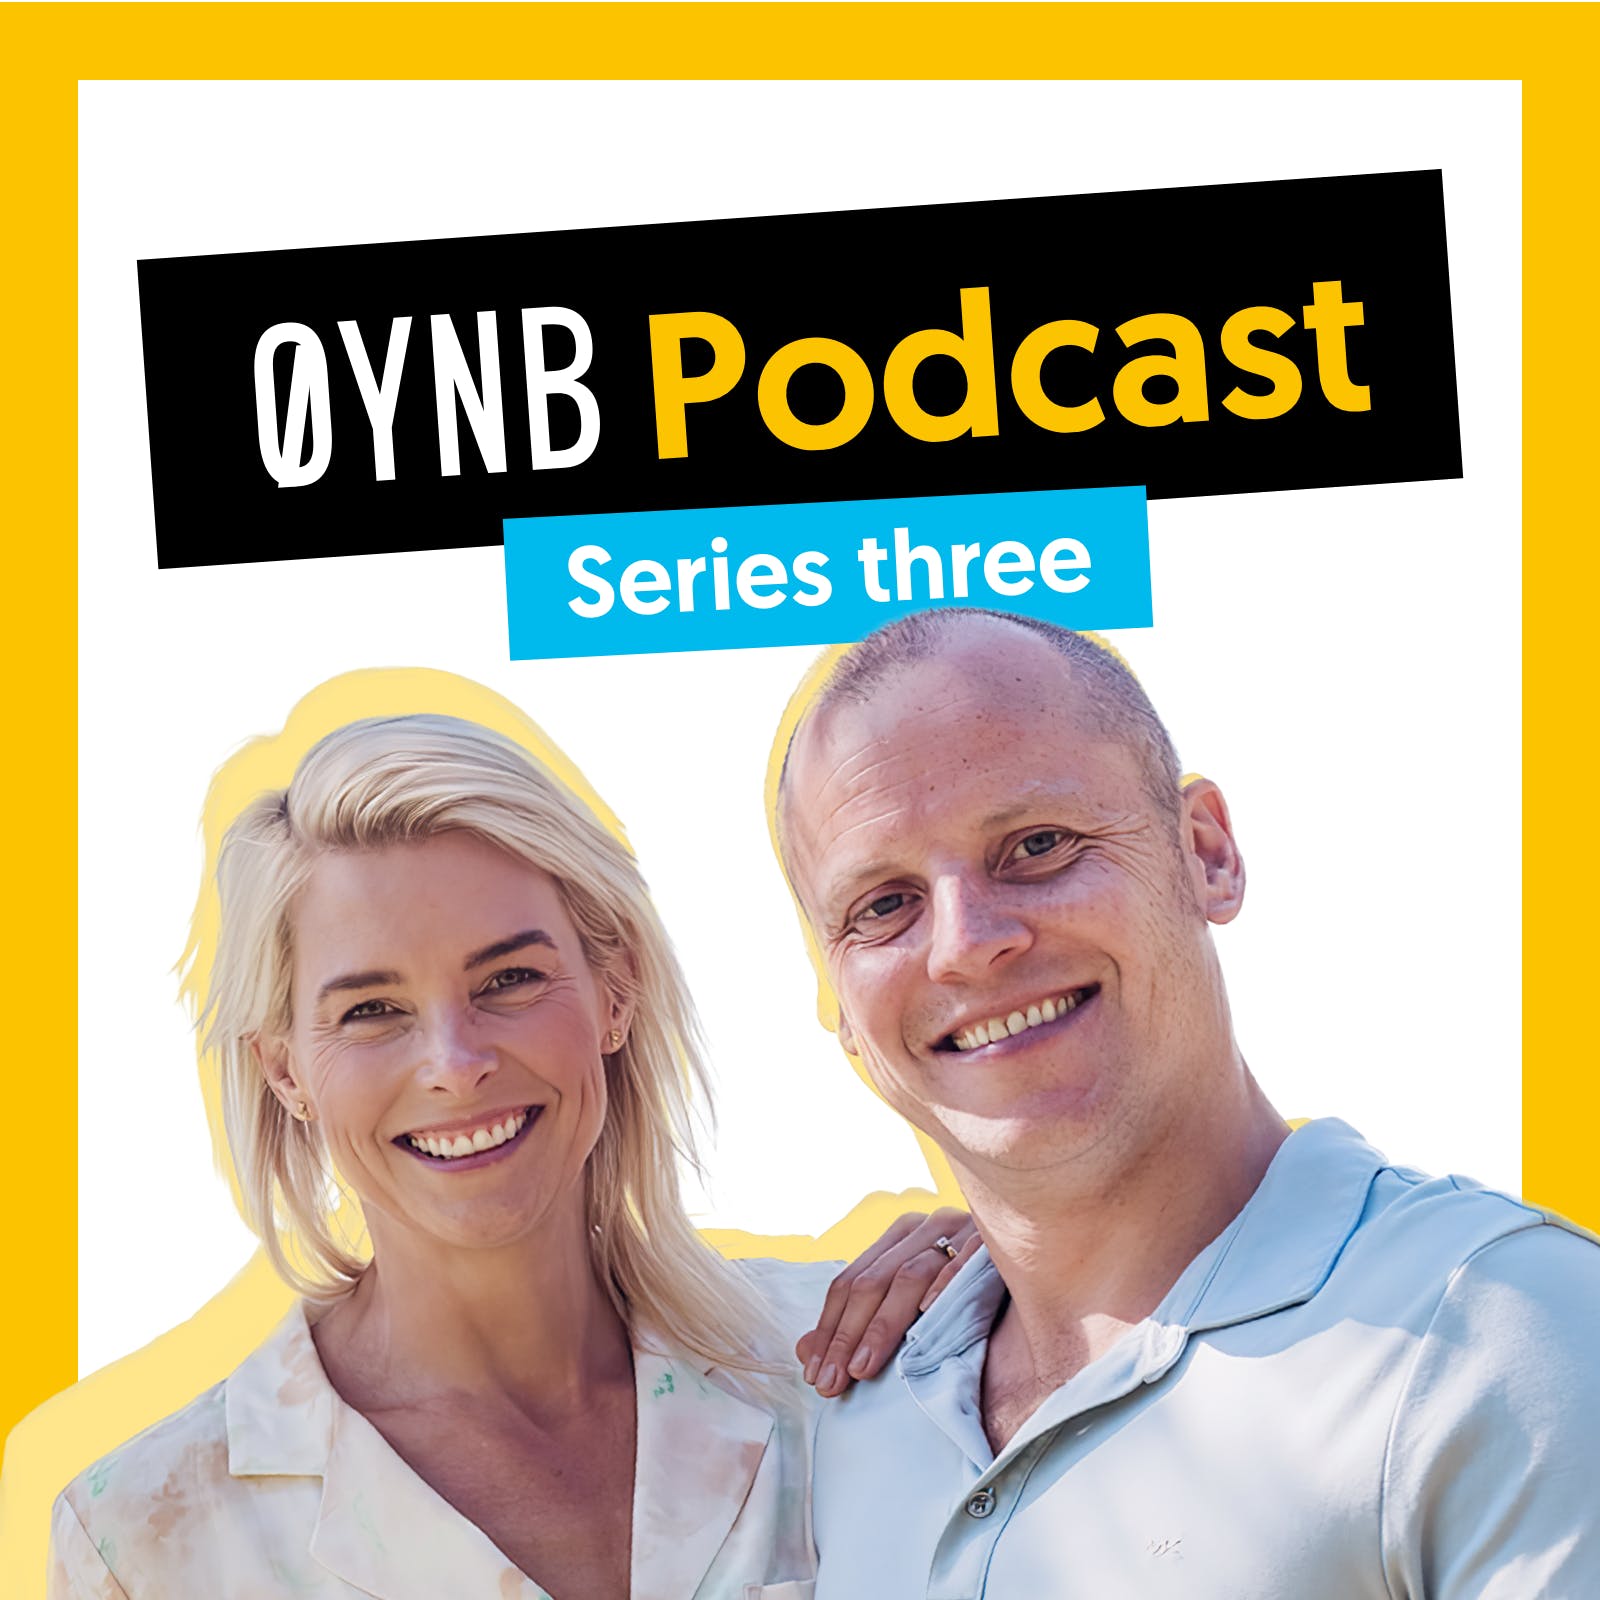 OYNB - One Year No Beer Podcast